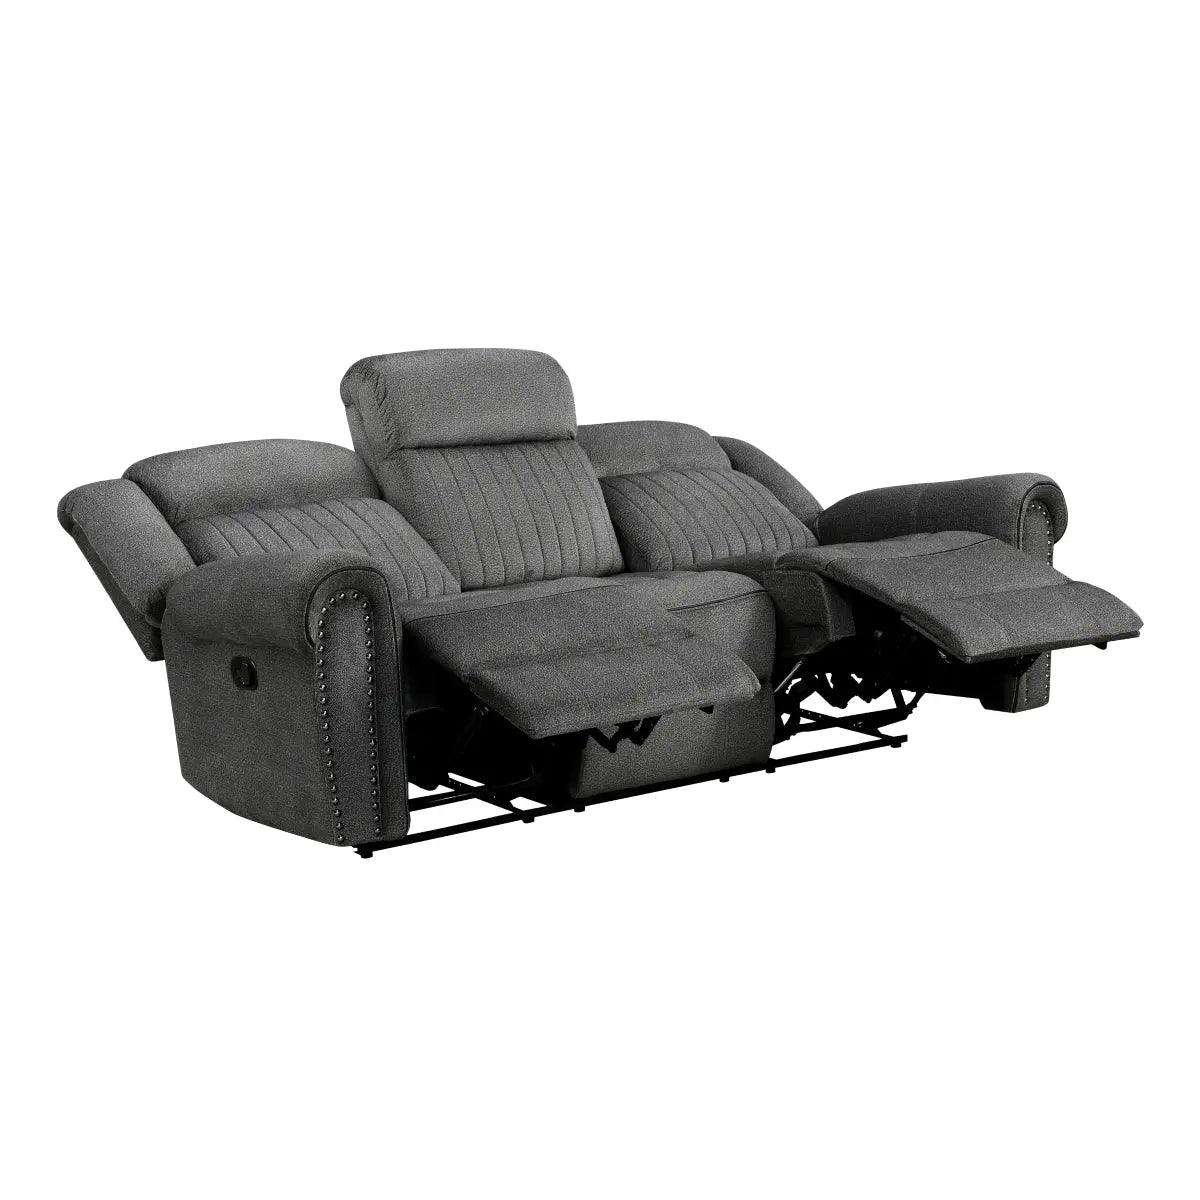 Brennen Double Reclining Sofa in Charcoal by Homelegance Homelegance Furniture